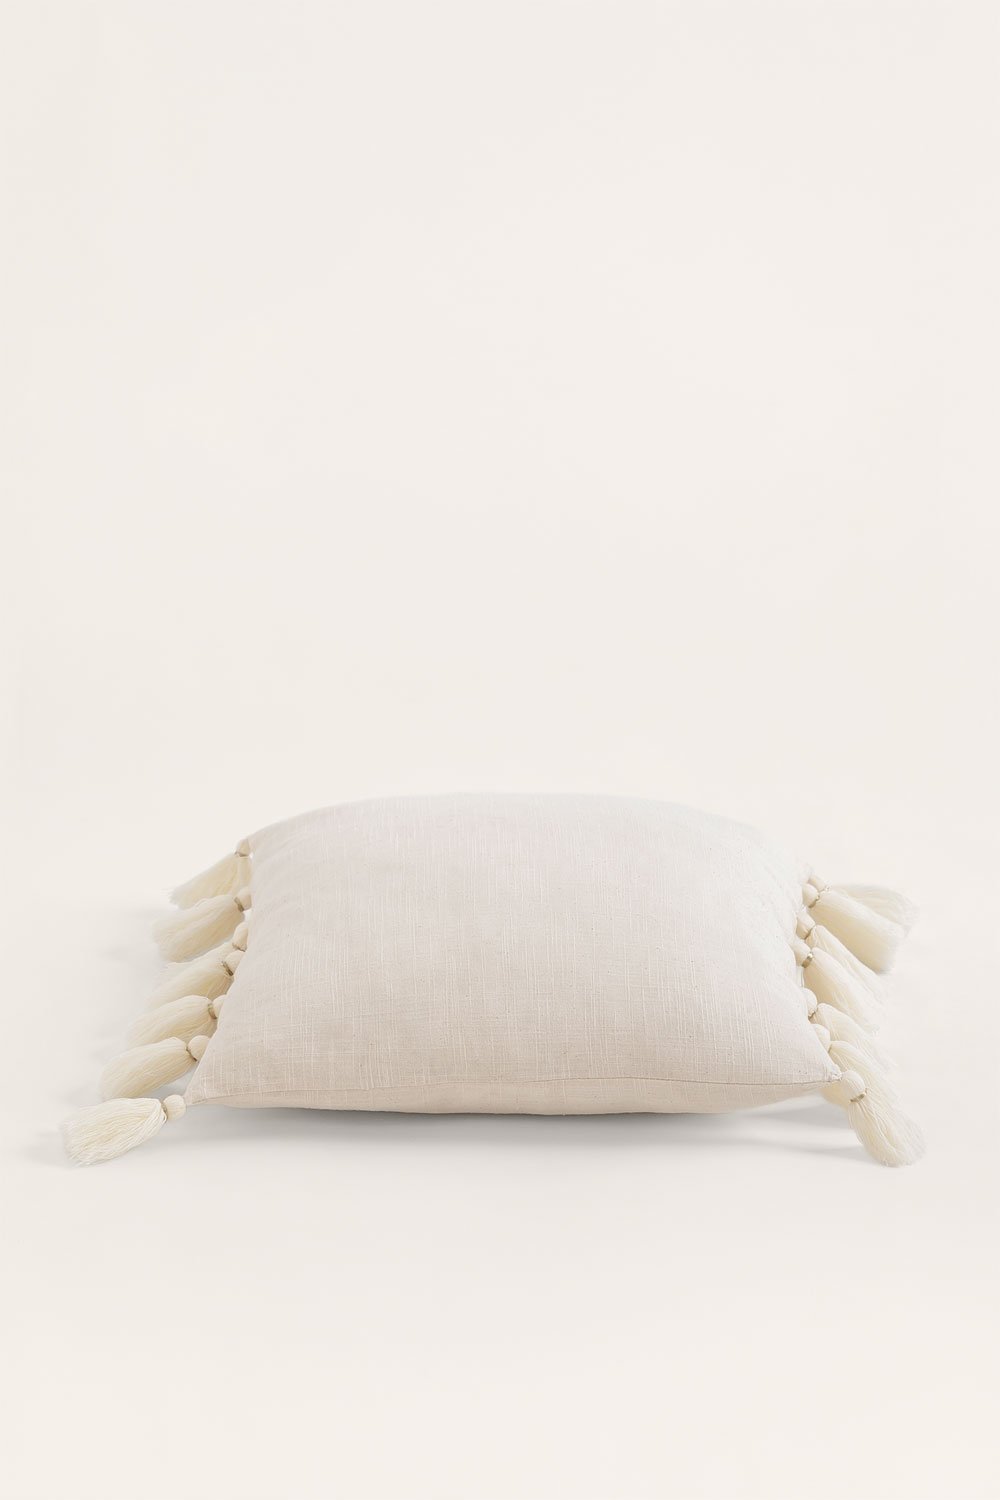 Square Cotton Cushion (40 x 40 cm) Tuis, gallery image 2